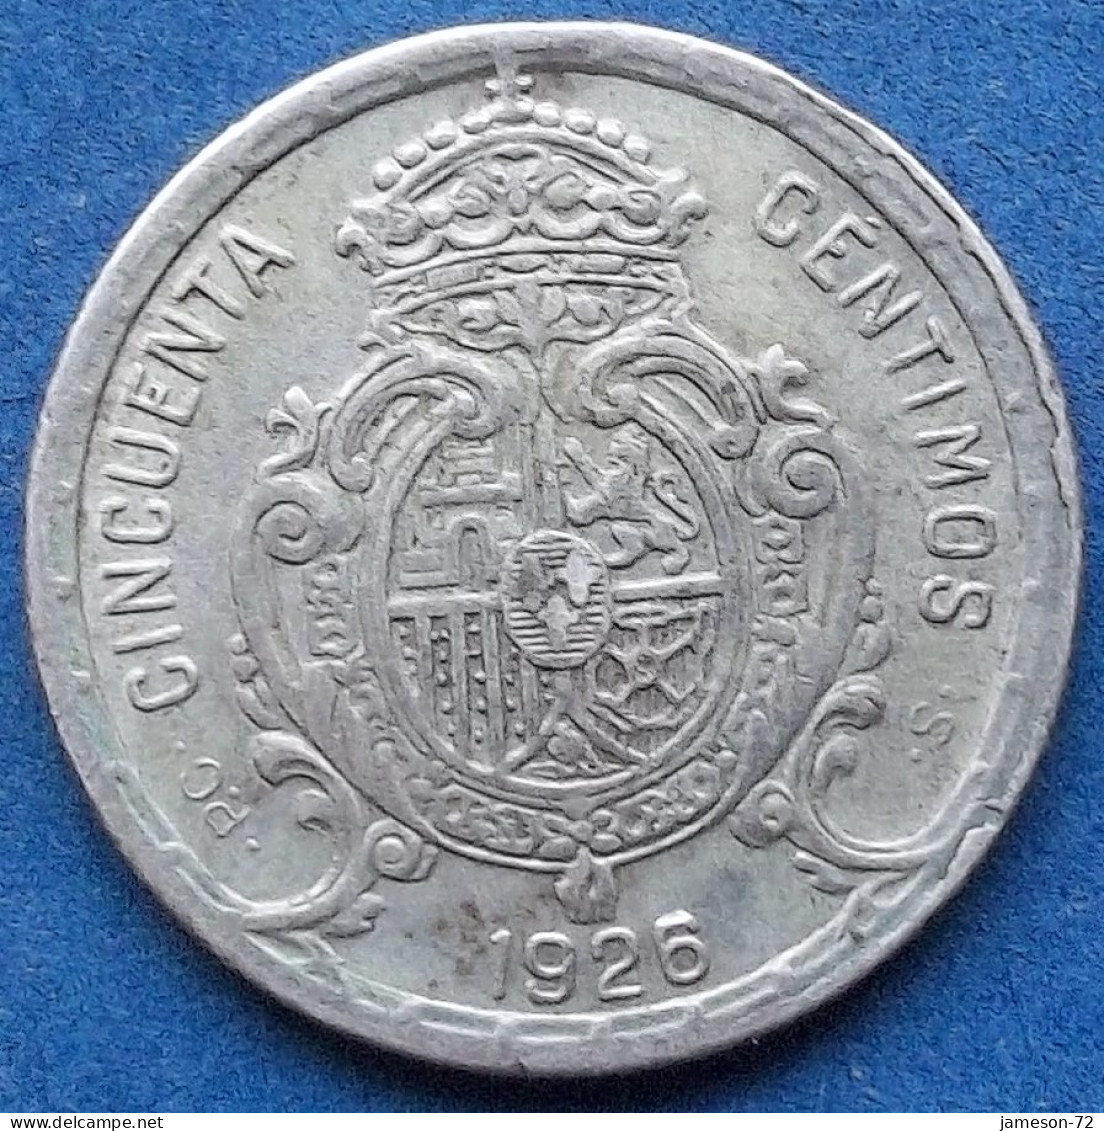 SPAIN - Silver 50 Centimos 1926 PC S KM# 741 Alfonso XIII (1886-1931) - Edelweiss Coins - First Minting